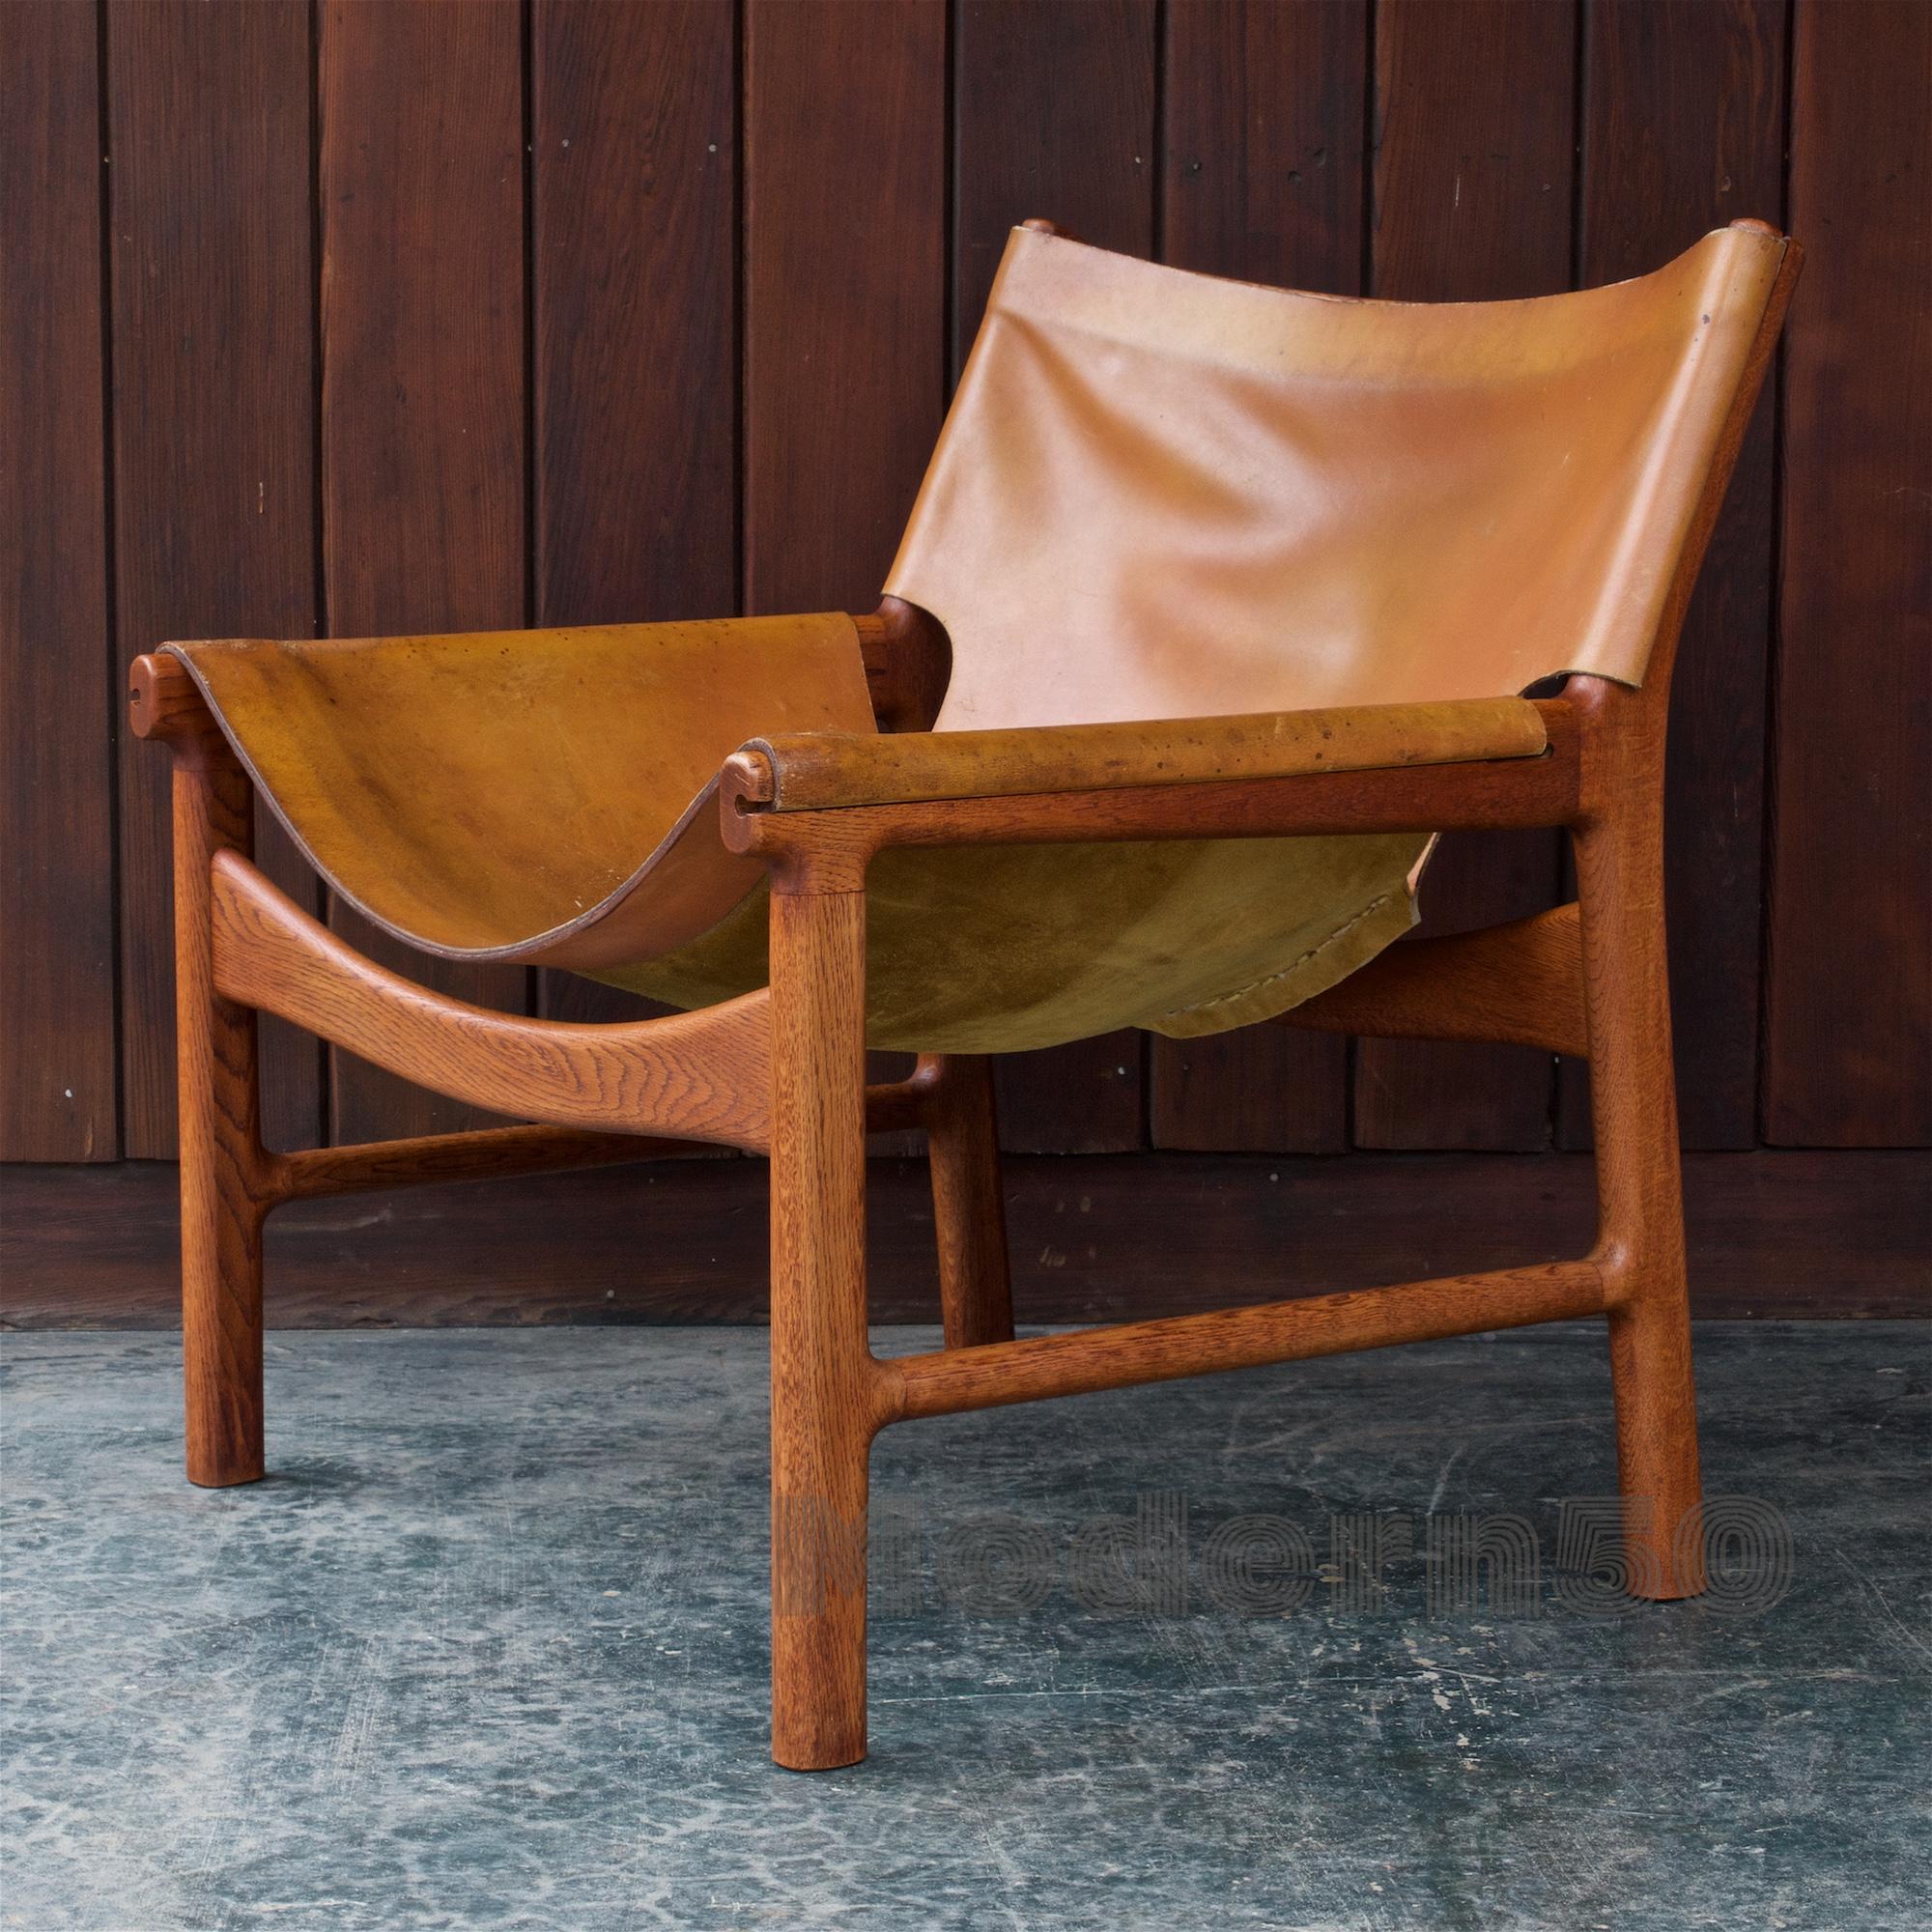 Illum Wikkelsø for Mikael Laursen, easy chair model no.103, in cognac leather and oak. Made in Denmark in the late 1950s. Measures: Seat height is 14 1/8 in. and the arm heights are 19 1/4 in.
  